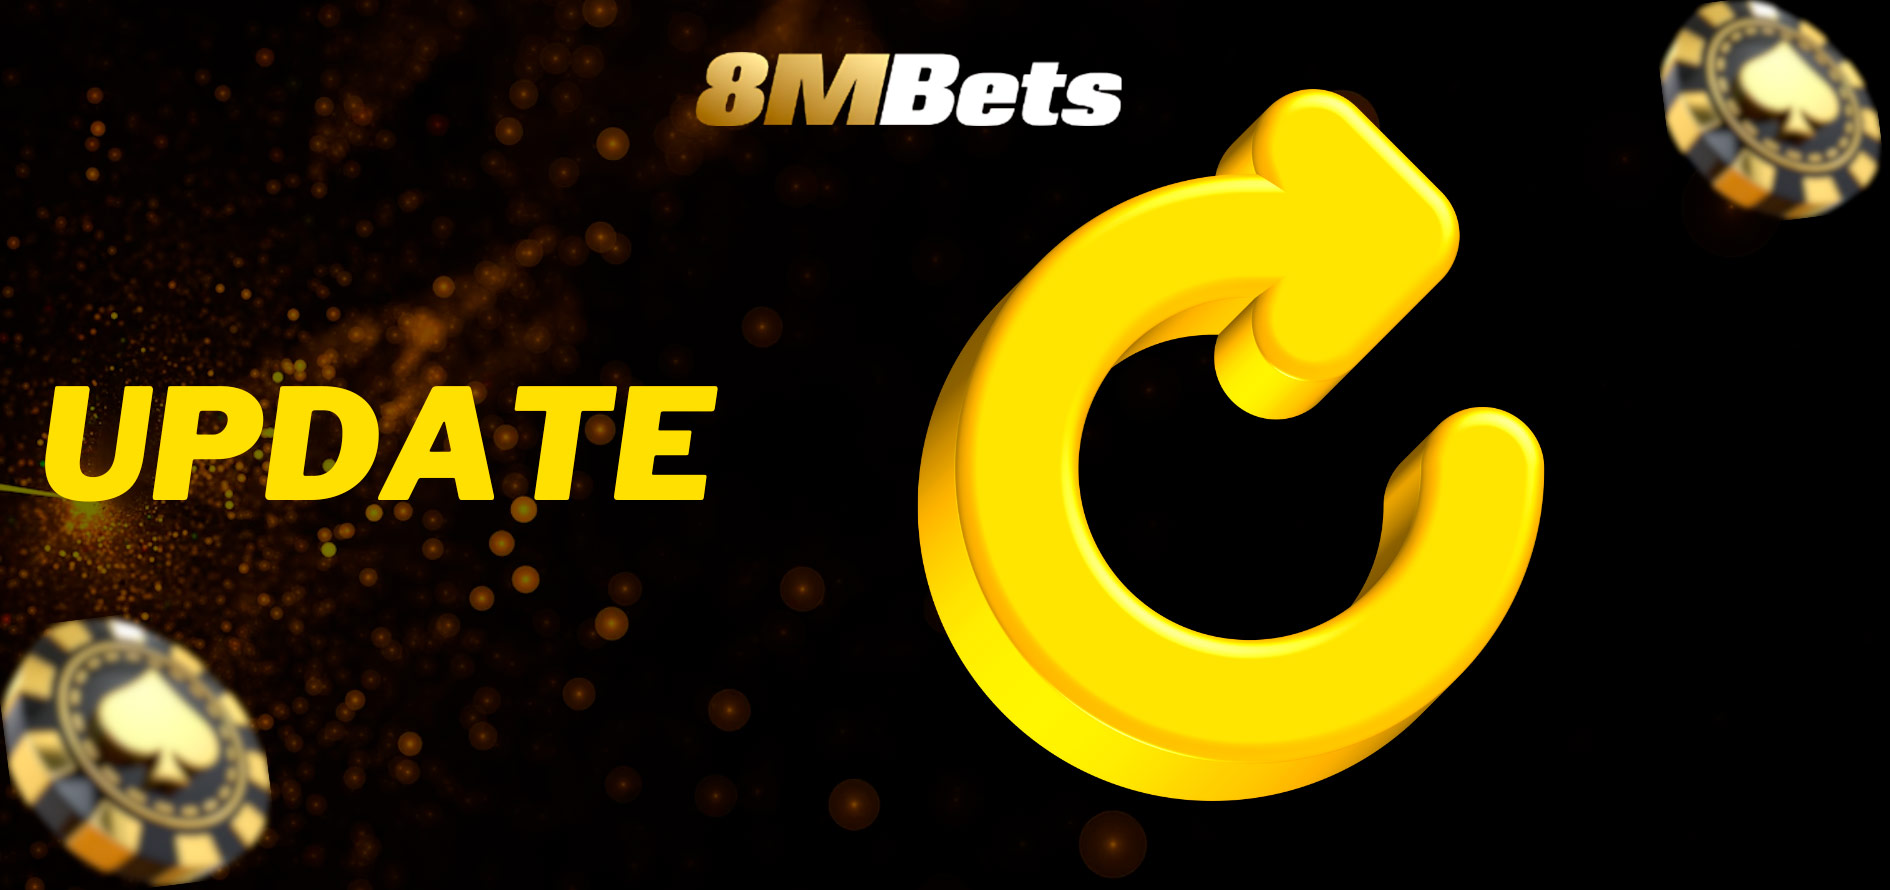 Update Version of 8mbets Mobile App Now Available - Follow These Easy Steps to Get the Latest Features